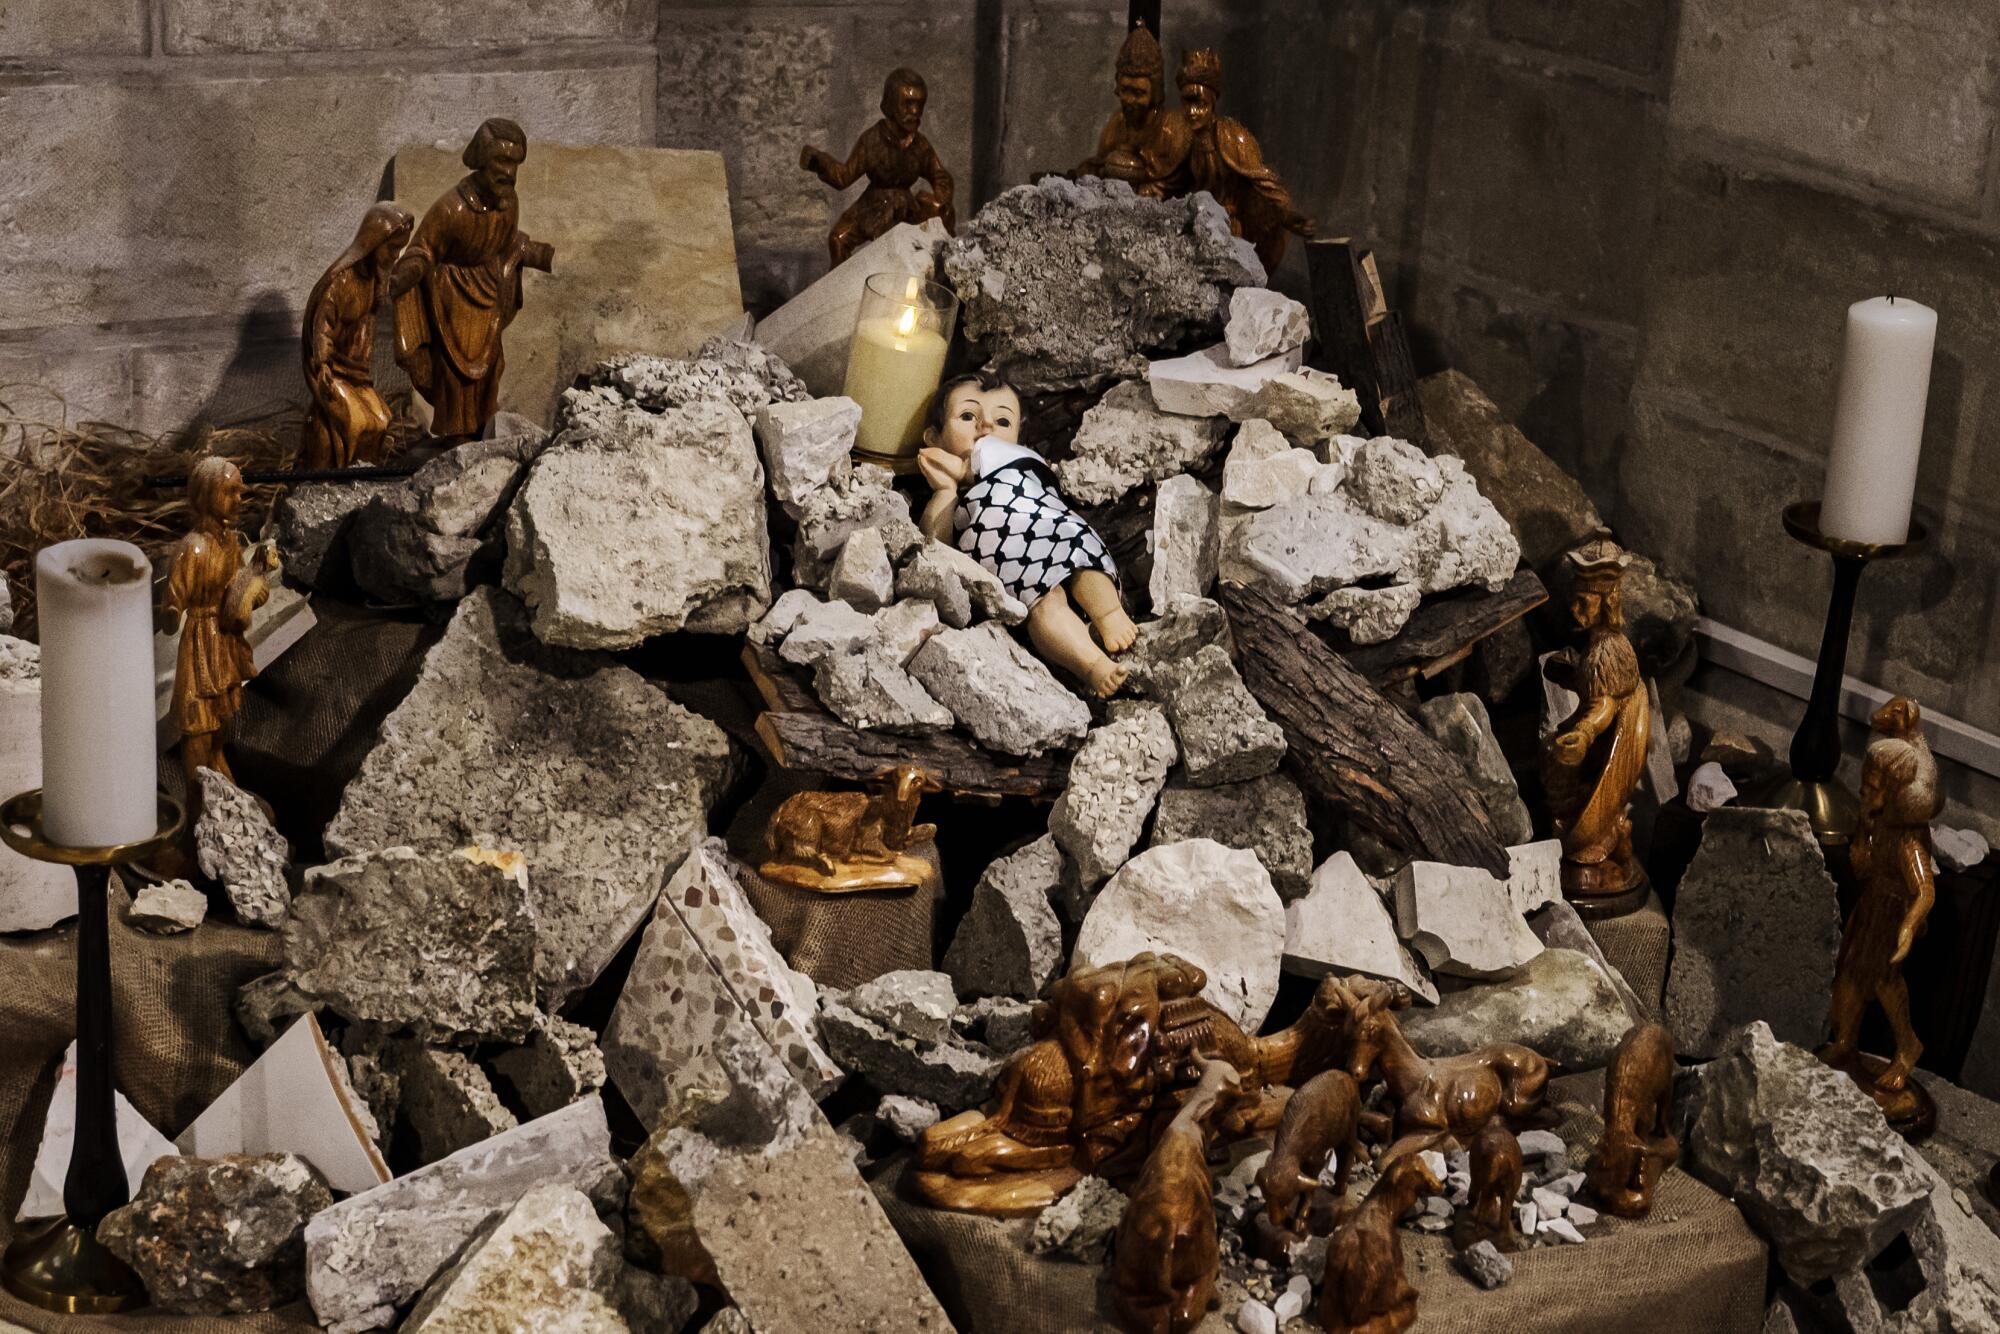 A pile of jagged stones with a baby Jesus figurine